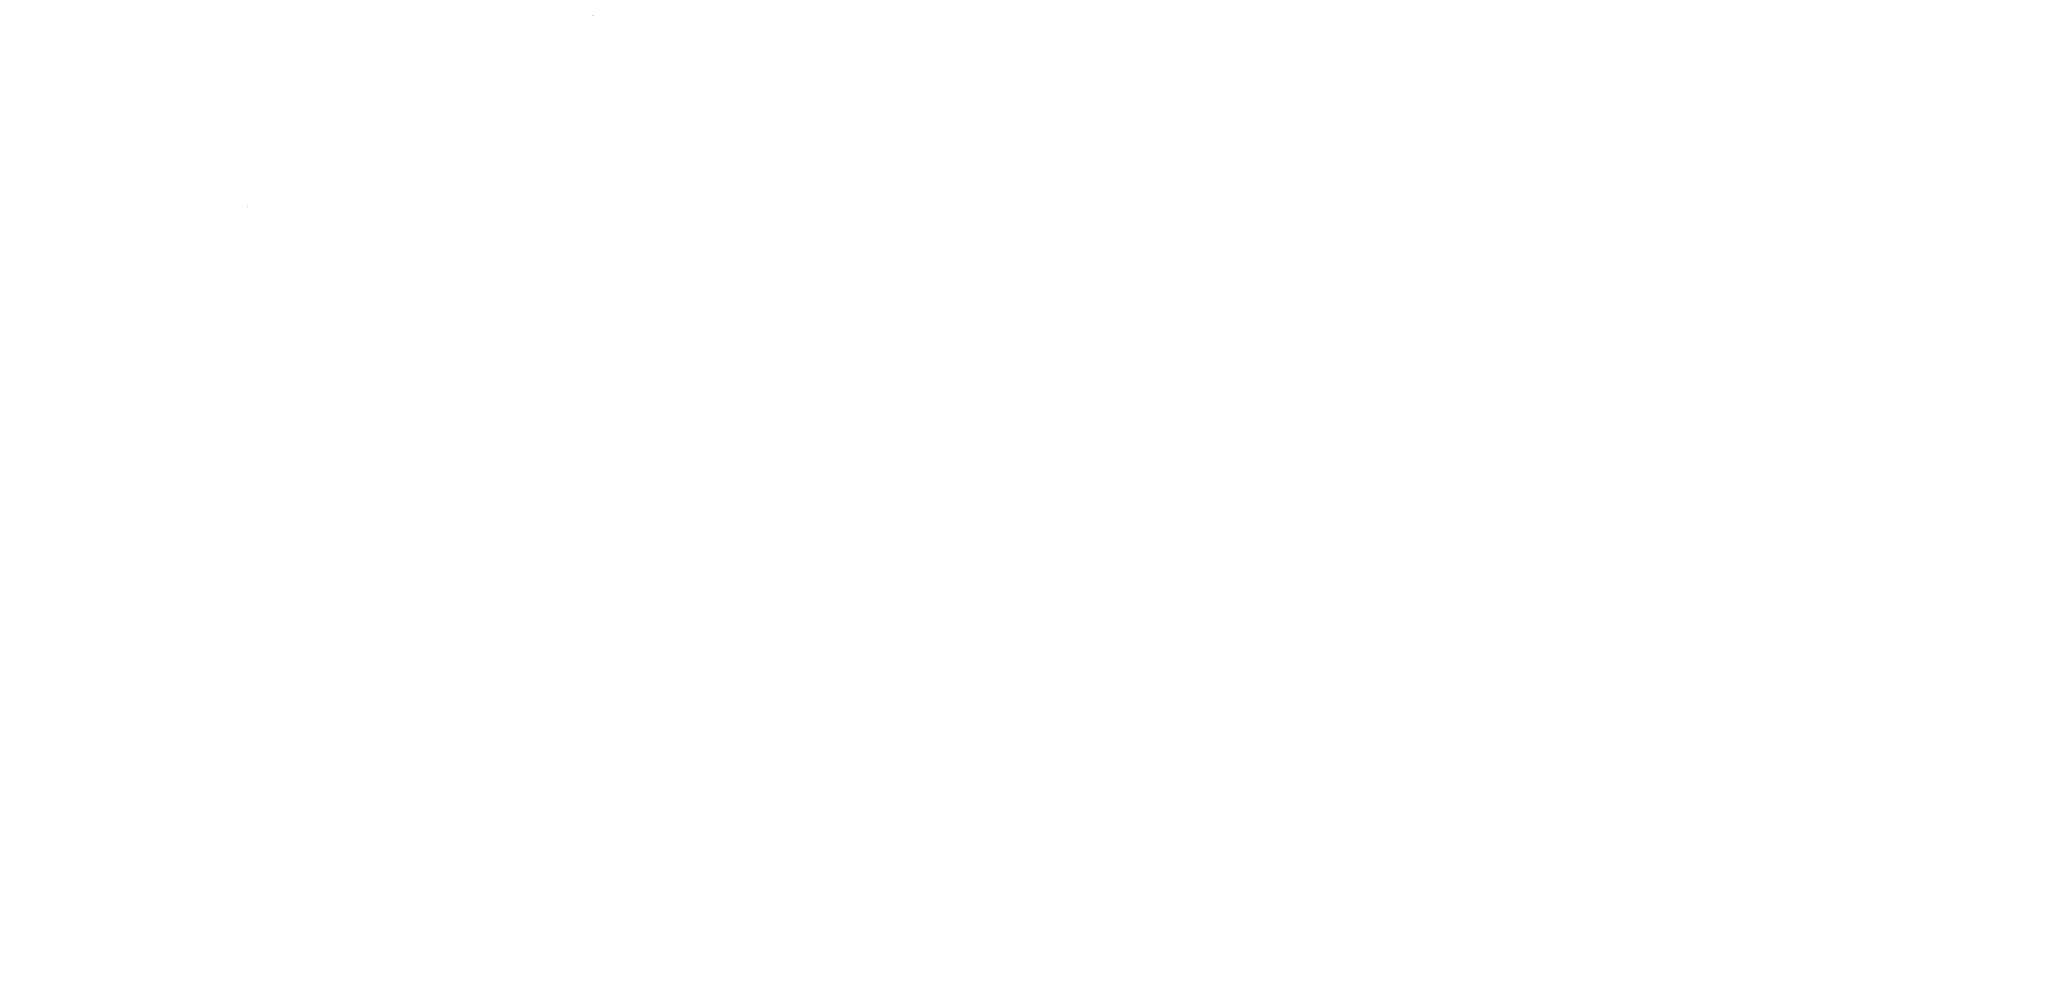 Pace Technologies